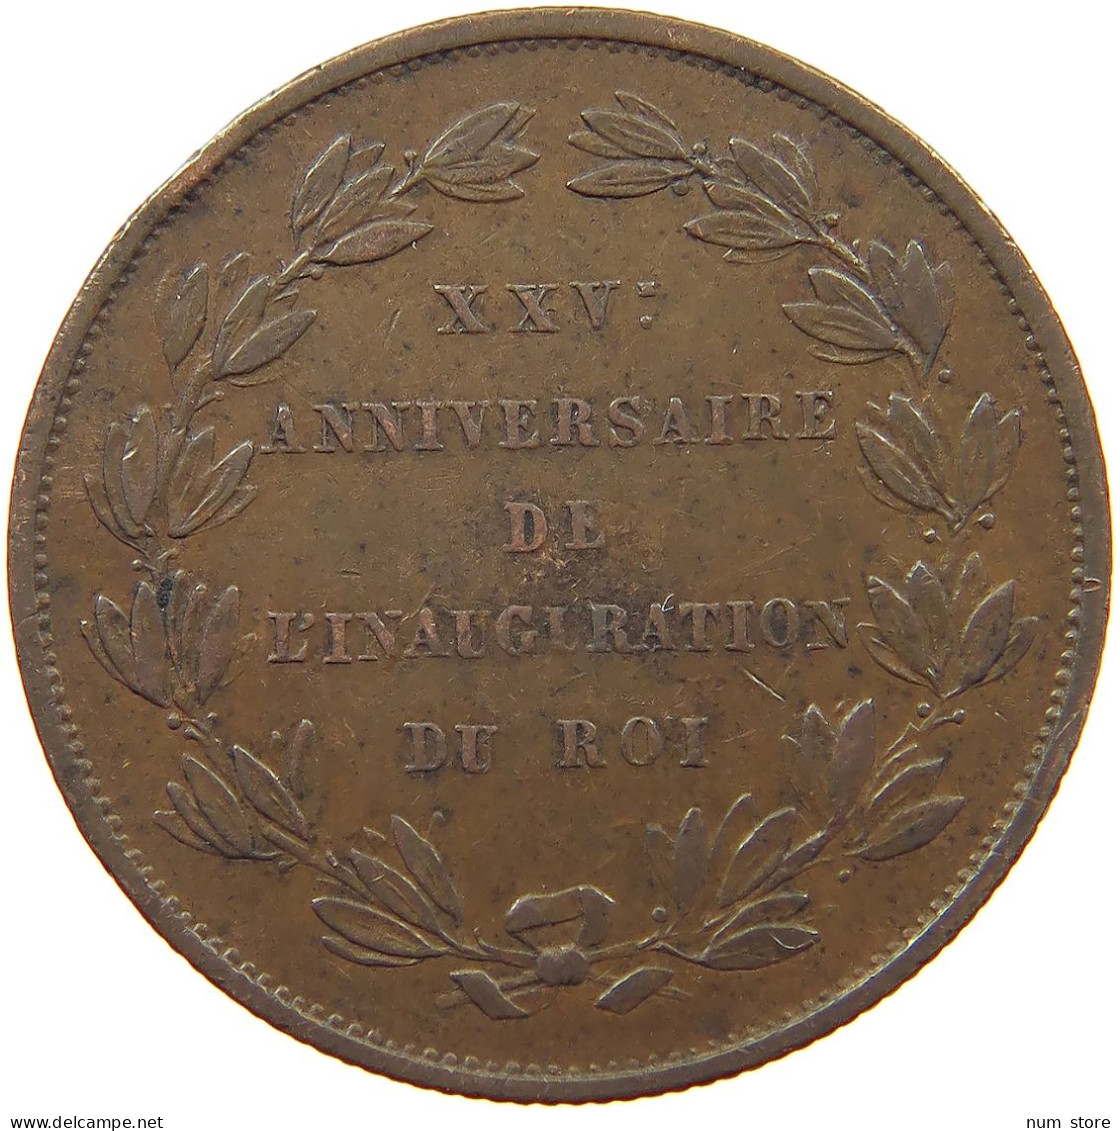 BELGIUM MEDAL 1856 Leopold I. (1831-1865) 25 ANNIVERSARY INAUGURATION #s060 0027 - Unclassified